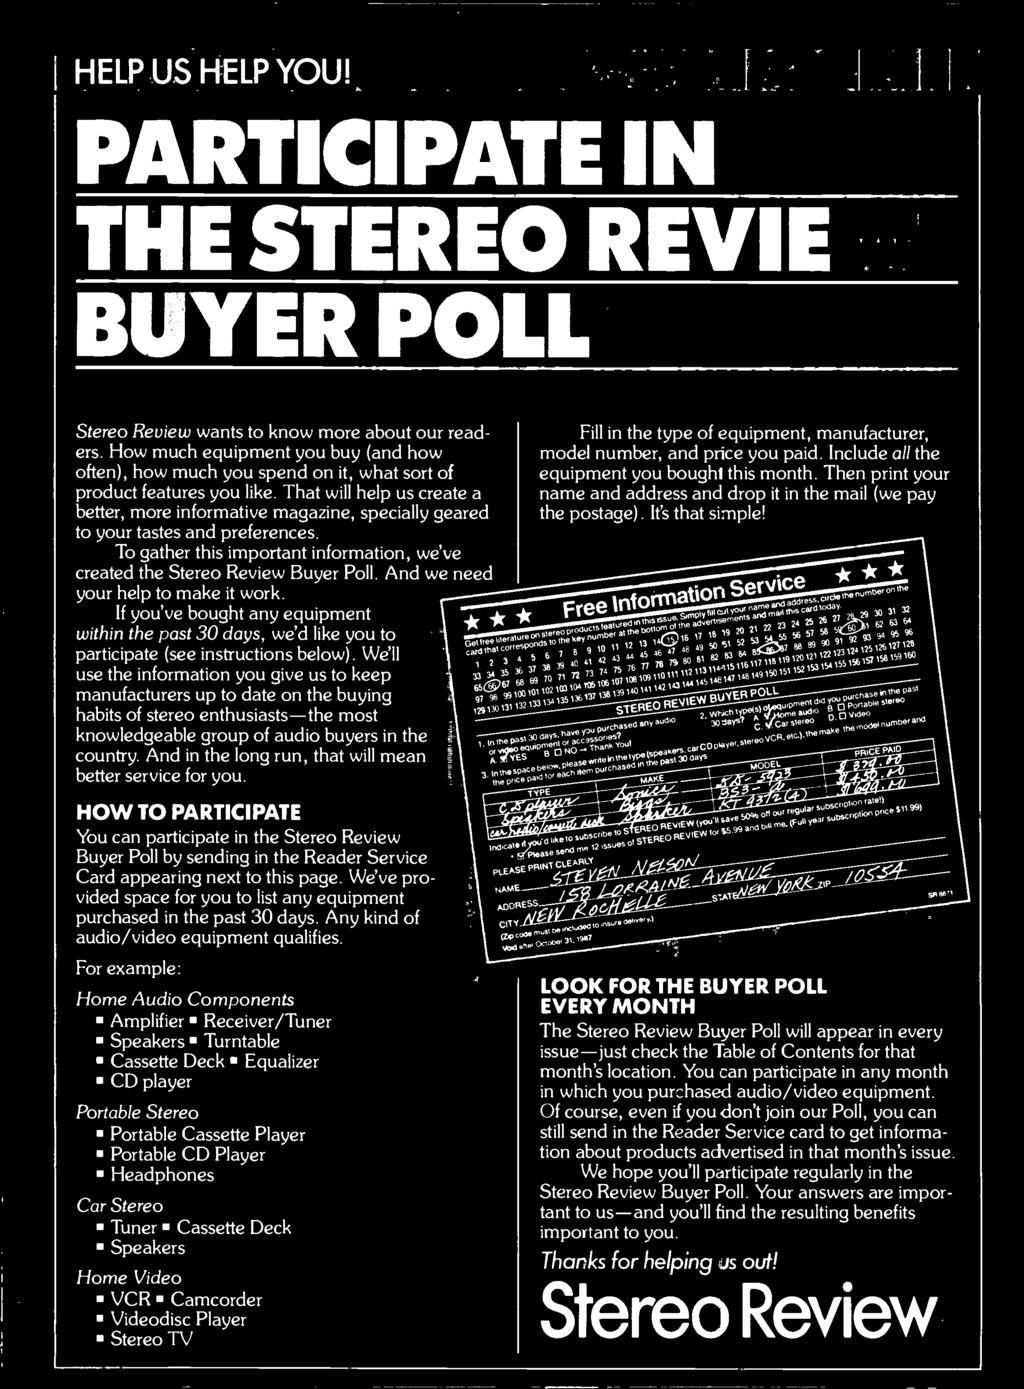 That will help us create a better, more informative magazine, specially geared to your tastes and preferences. To gather this important information, we've created the Stereo Review Buyer Poll.